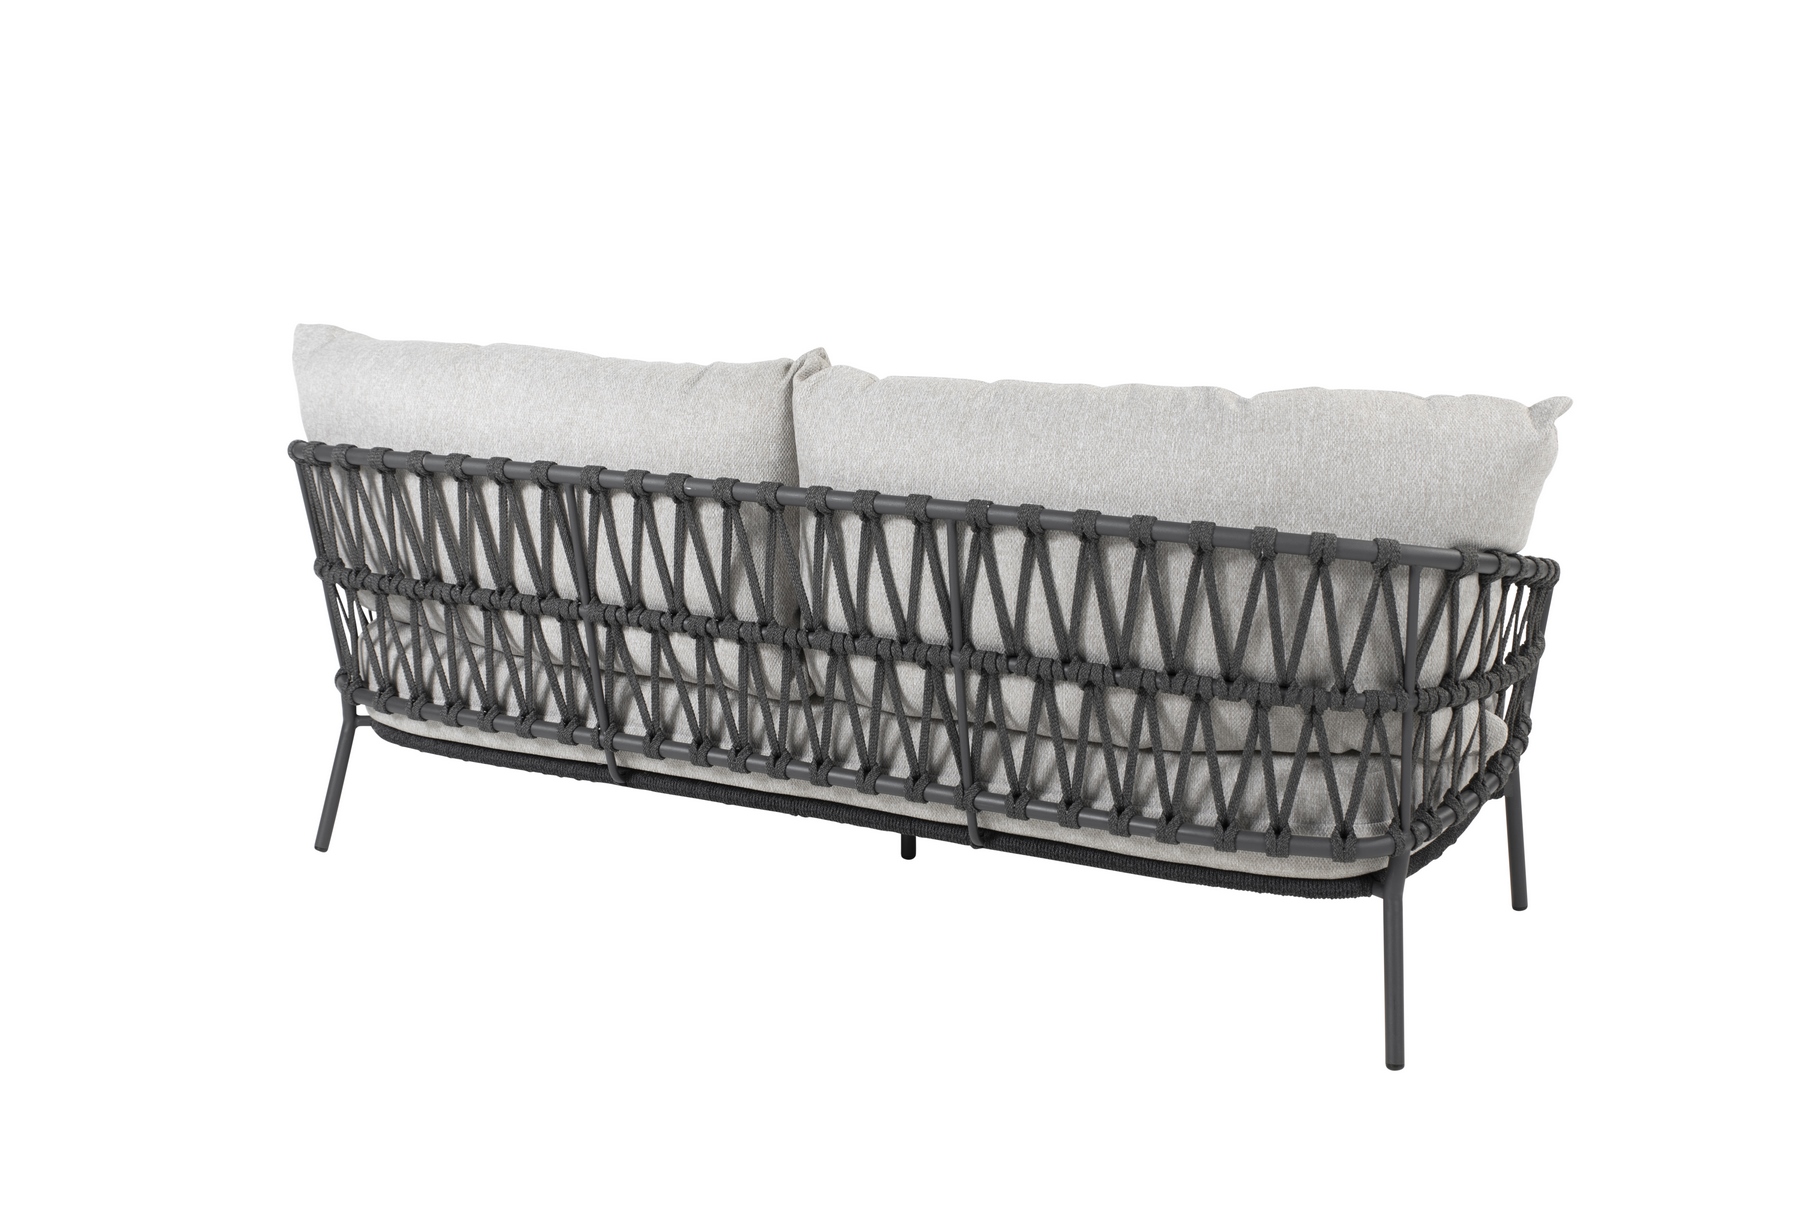 213892__Calpi_living_bench_3_seater_with_3_cushions_02.jpg